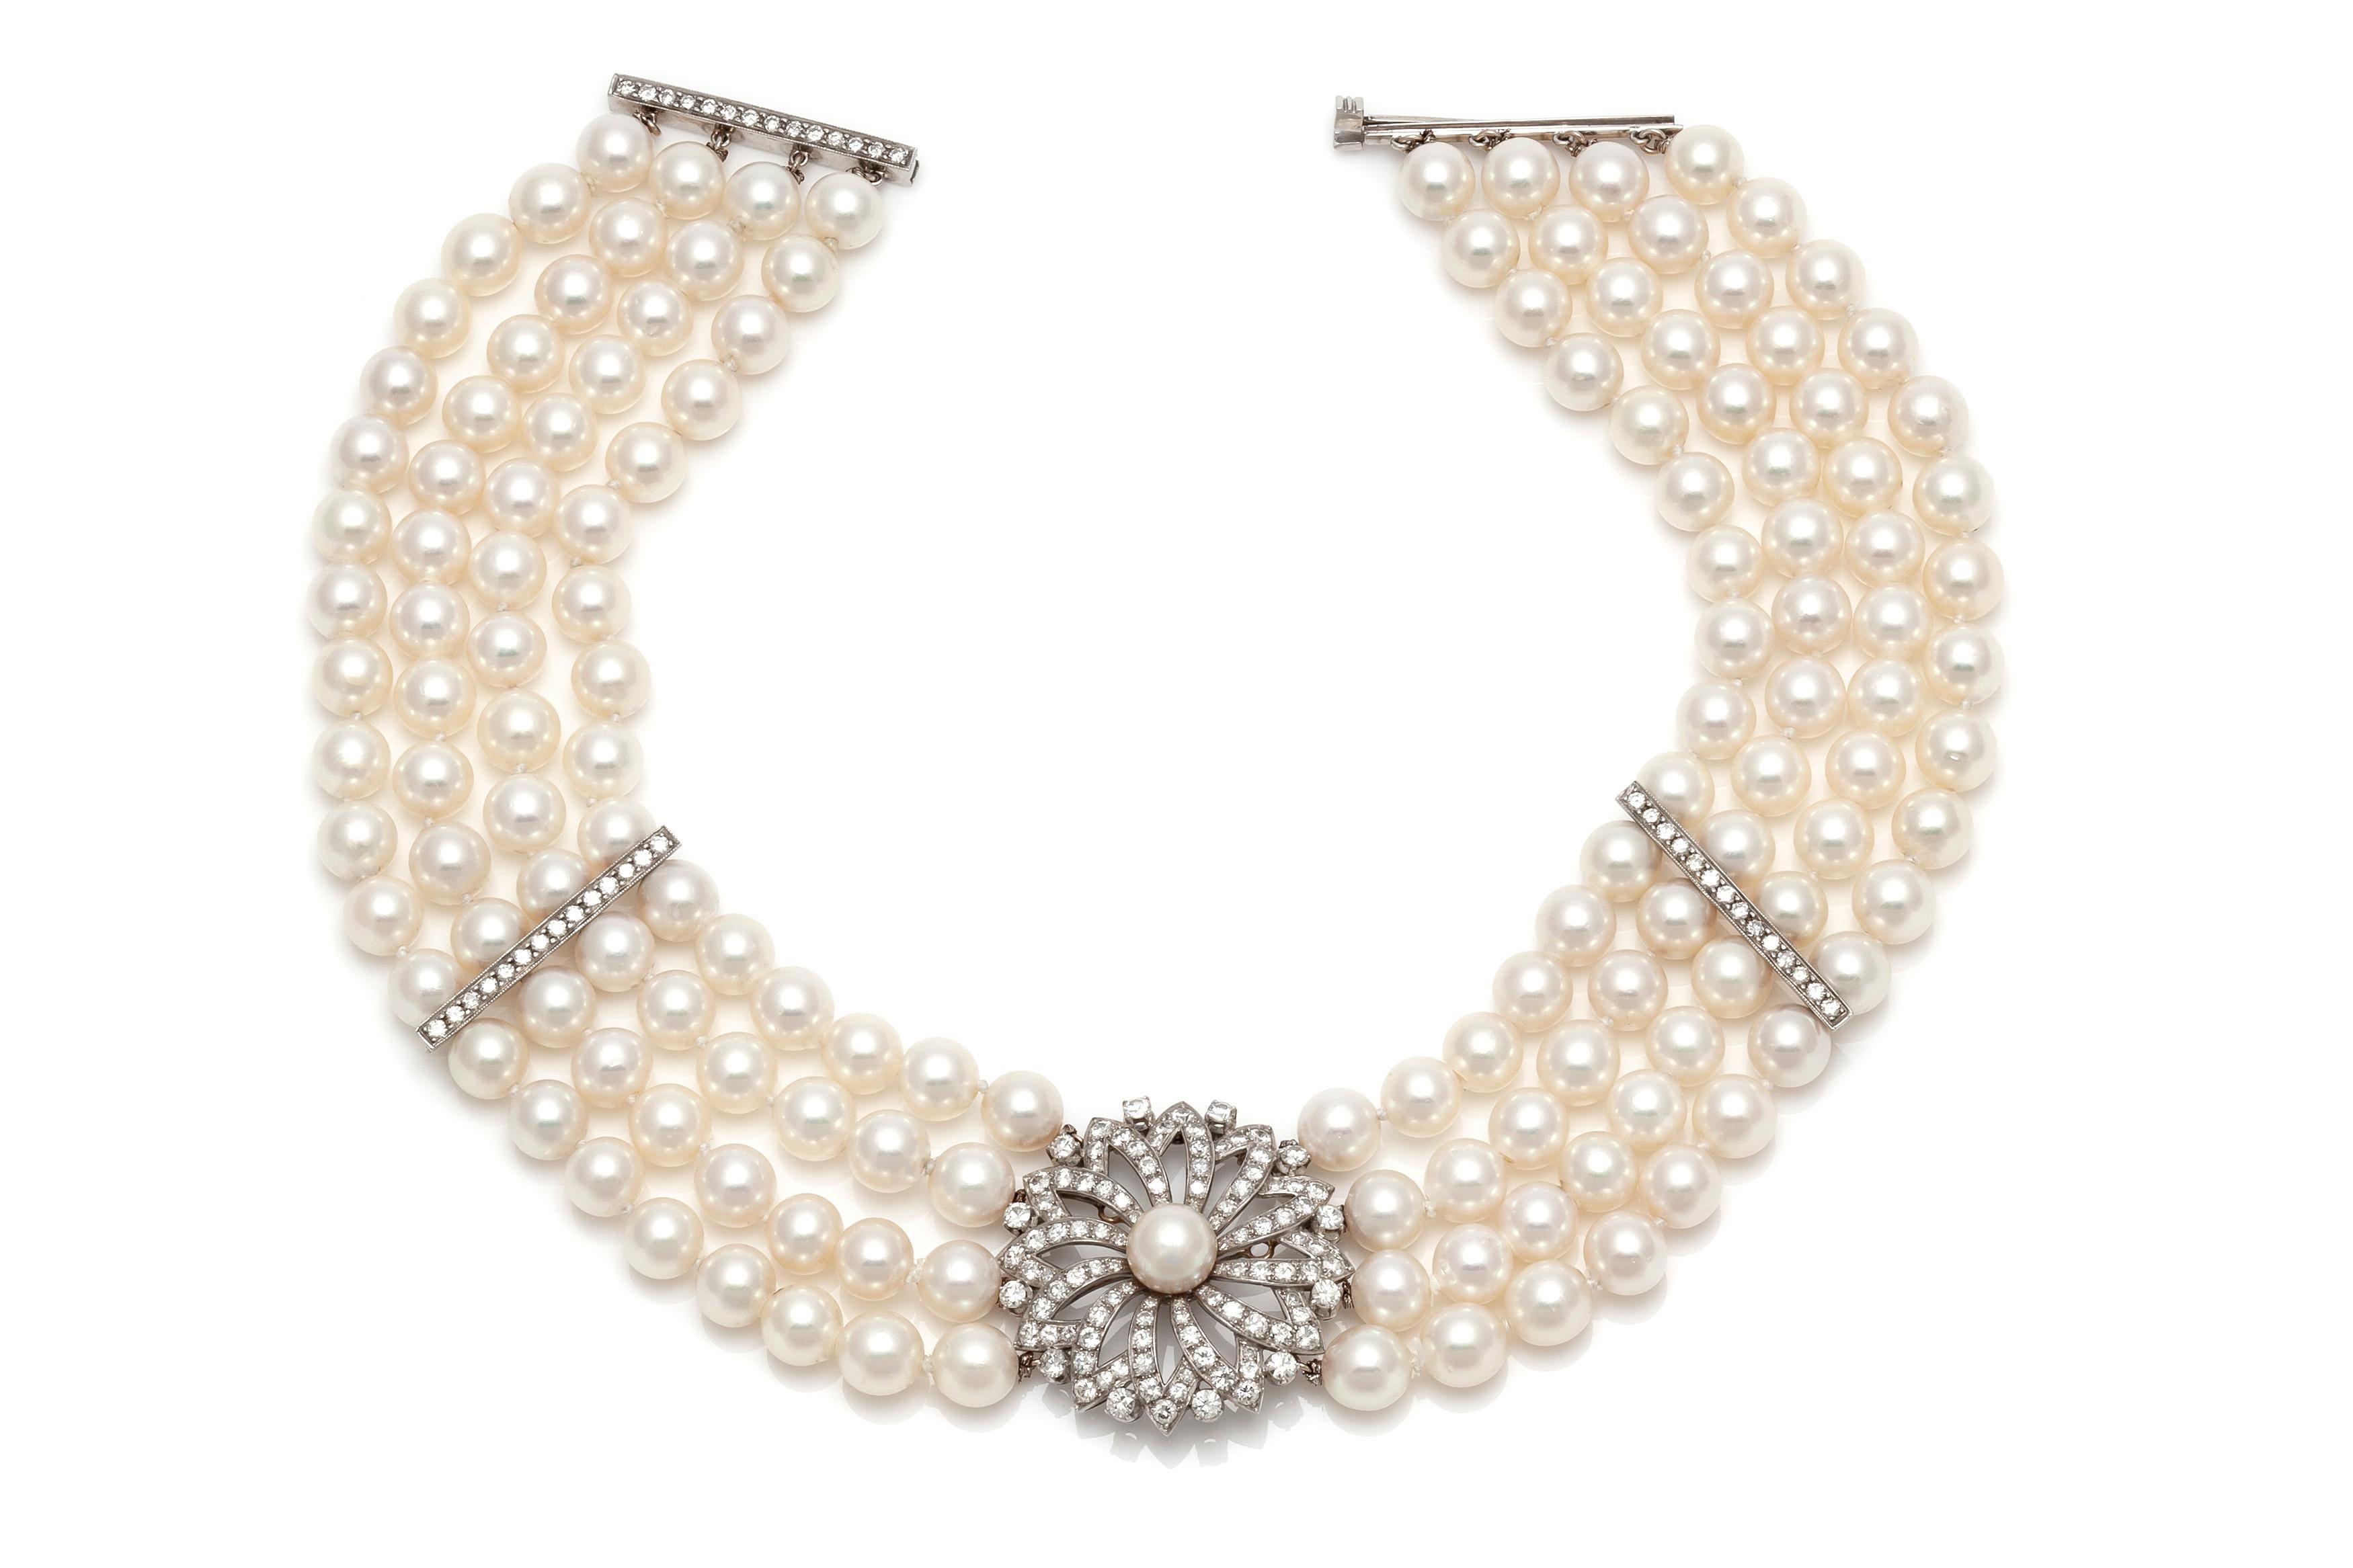 The magnificent collar necklace is finely crafted in platinum with bead cultured [pearls (akoya pearl oyster) and pendant diamonds  weighing approximately total of 7.00 carat.

This necklace has a GIA CERTIFICATE. 